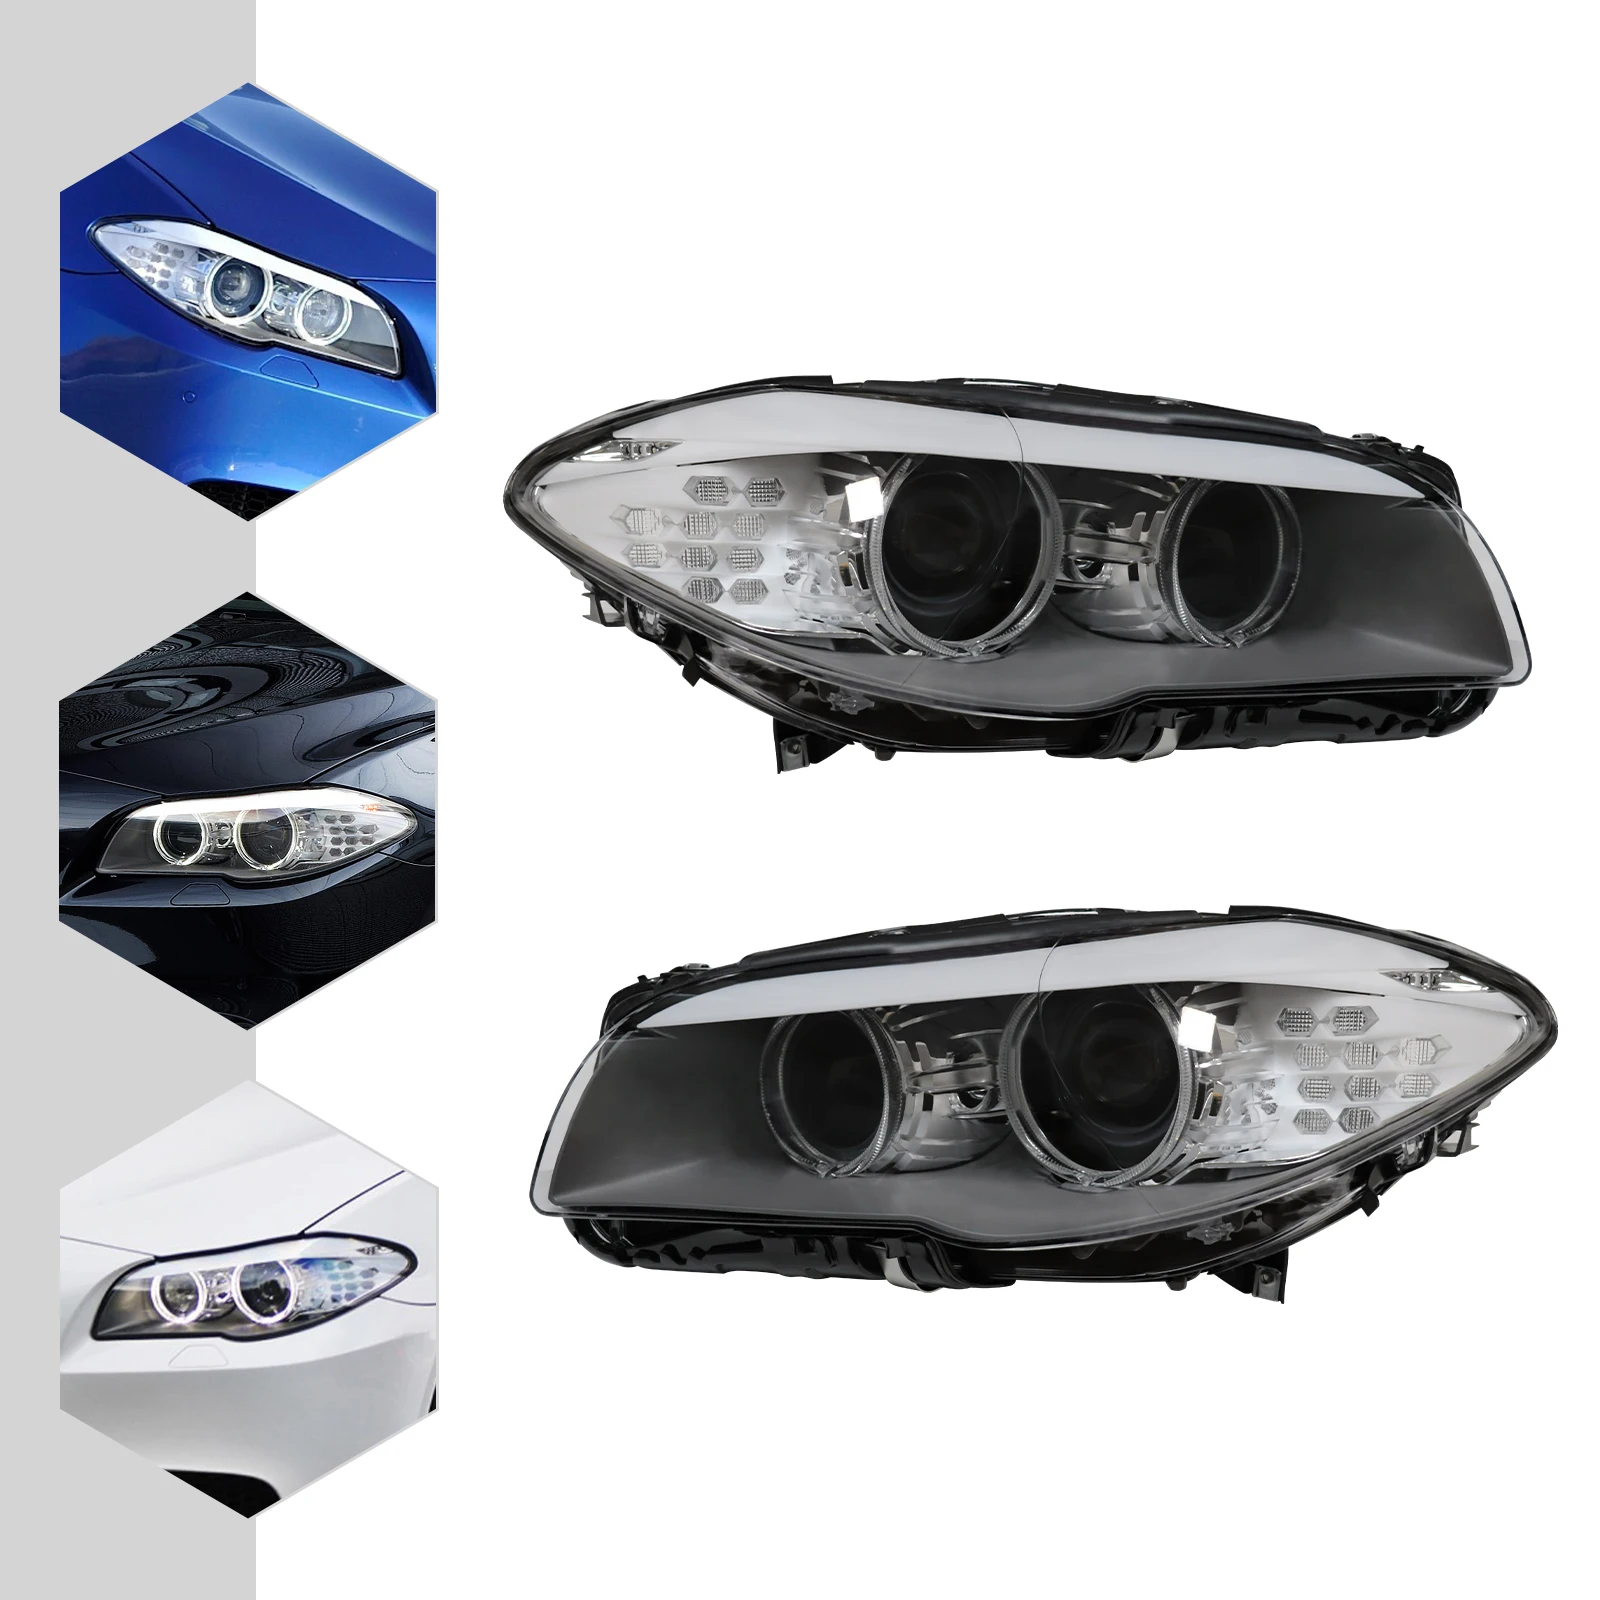 

Car Headlight Xenon HID Headlamp Fit for BMW 5 Series F10 2011-2013 550i 535i 528i 530i Left/Right Side Headlights Assembly Fit